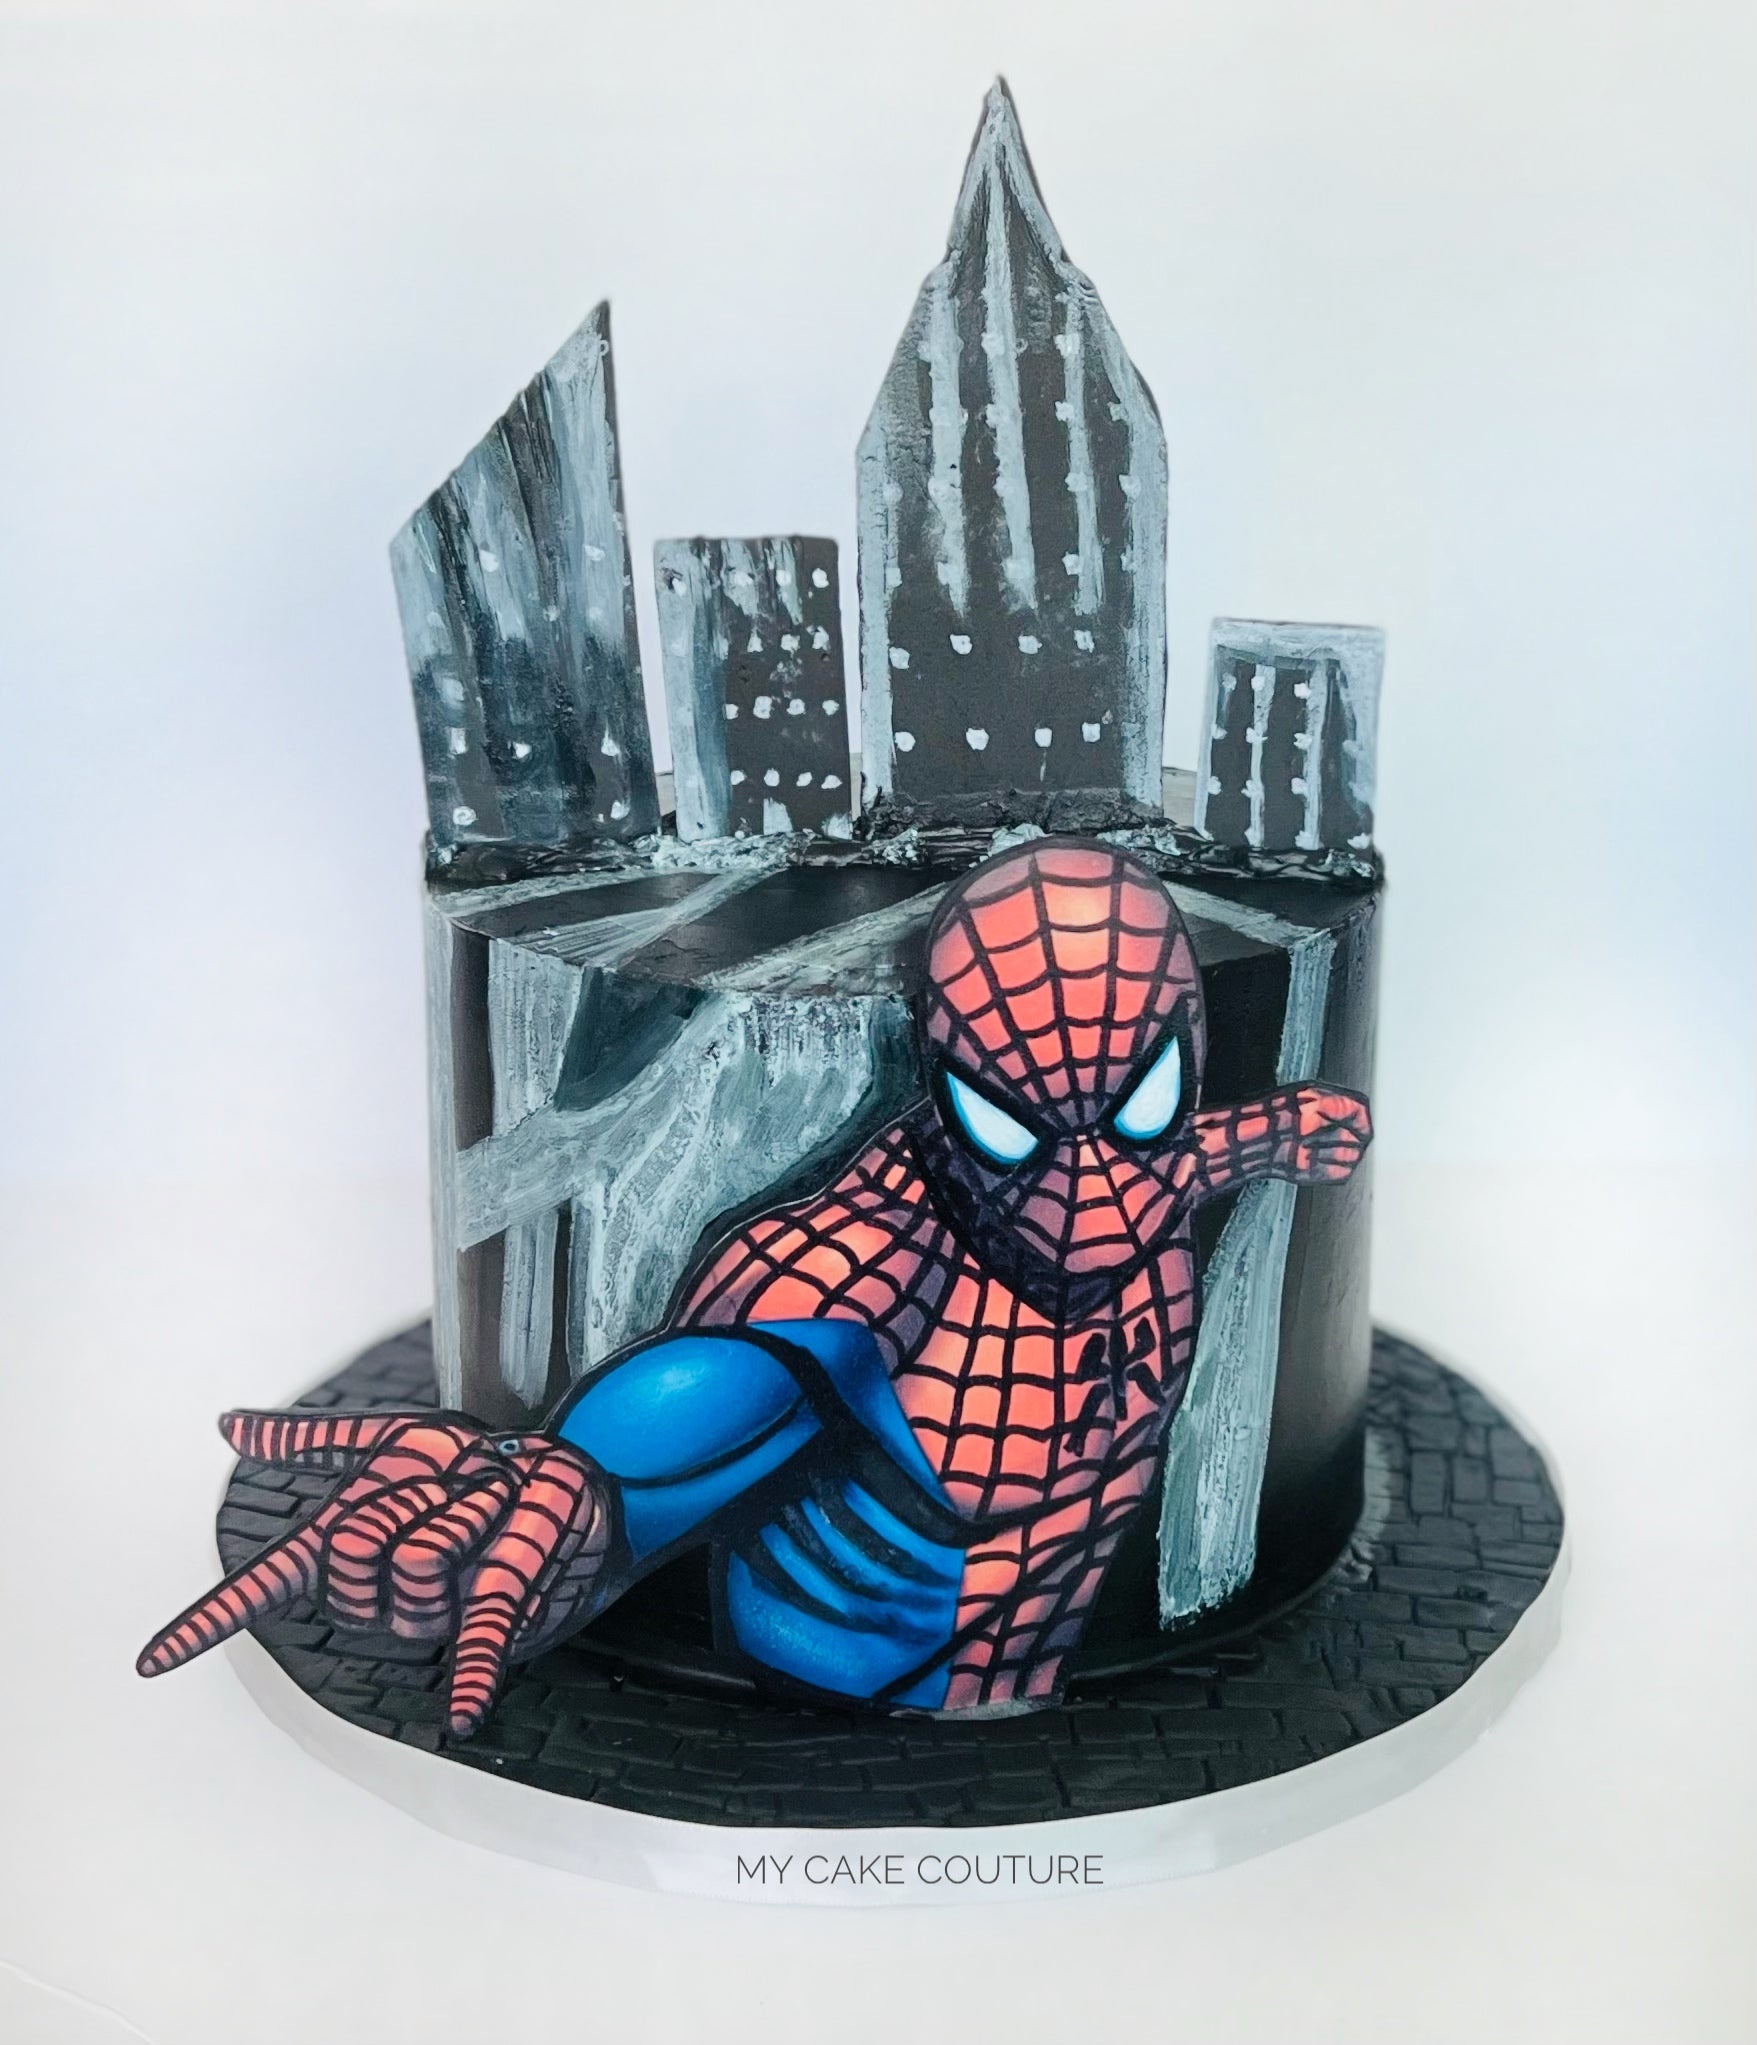 Cake Couture - edible art - Latest Creations